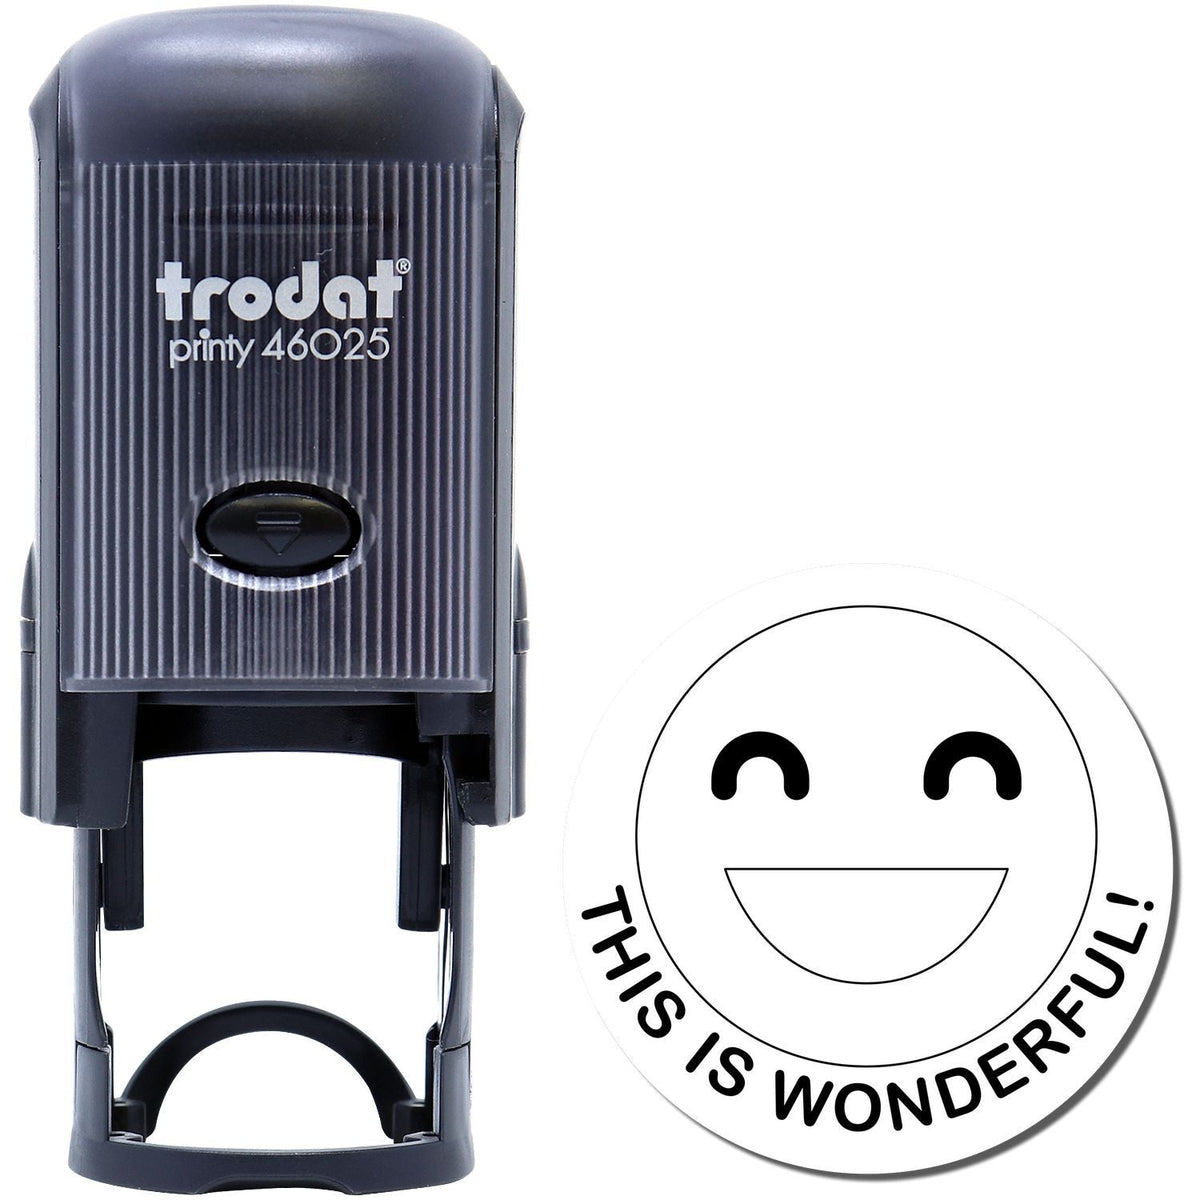 A Round This is Wonderful Smiley Self-Inking Stamp with a stamped image showing how the text &quot;THIS IS WONDERFUL!&quot; with a smiley will display after stamping.